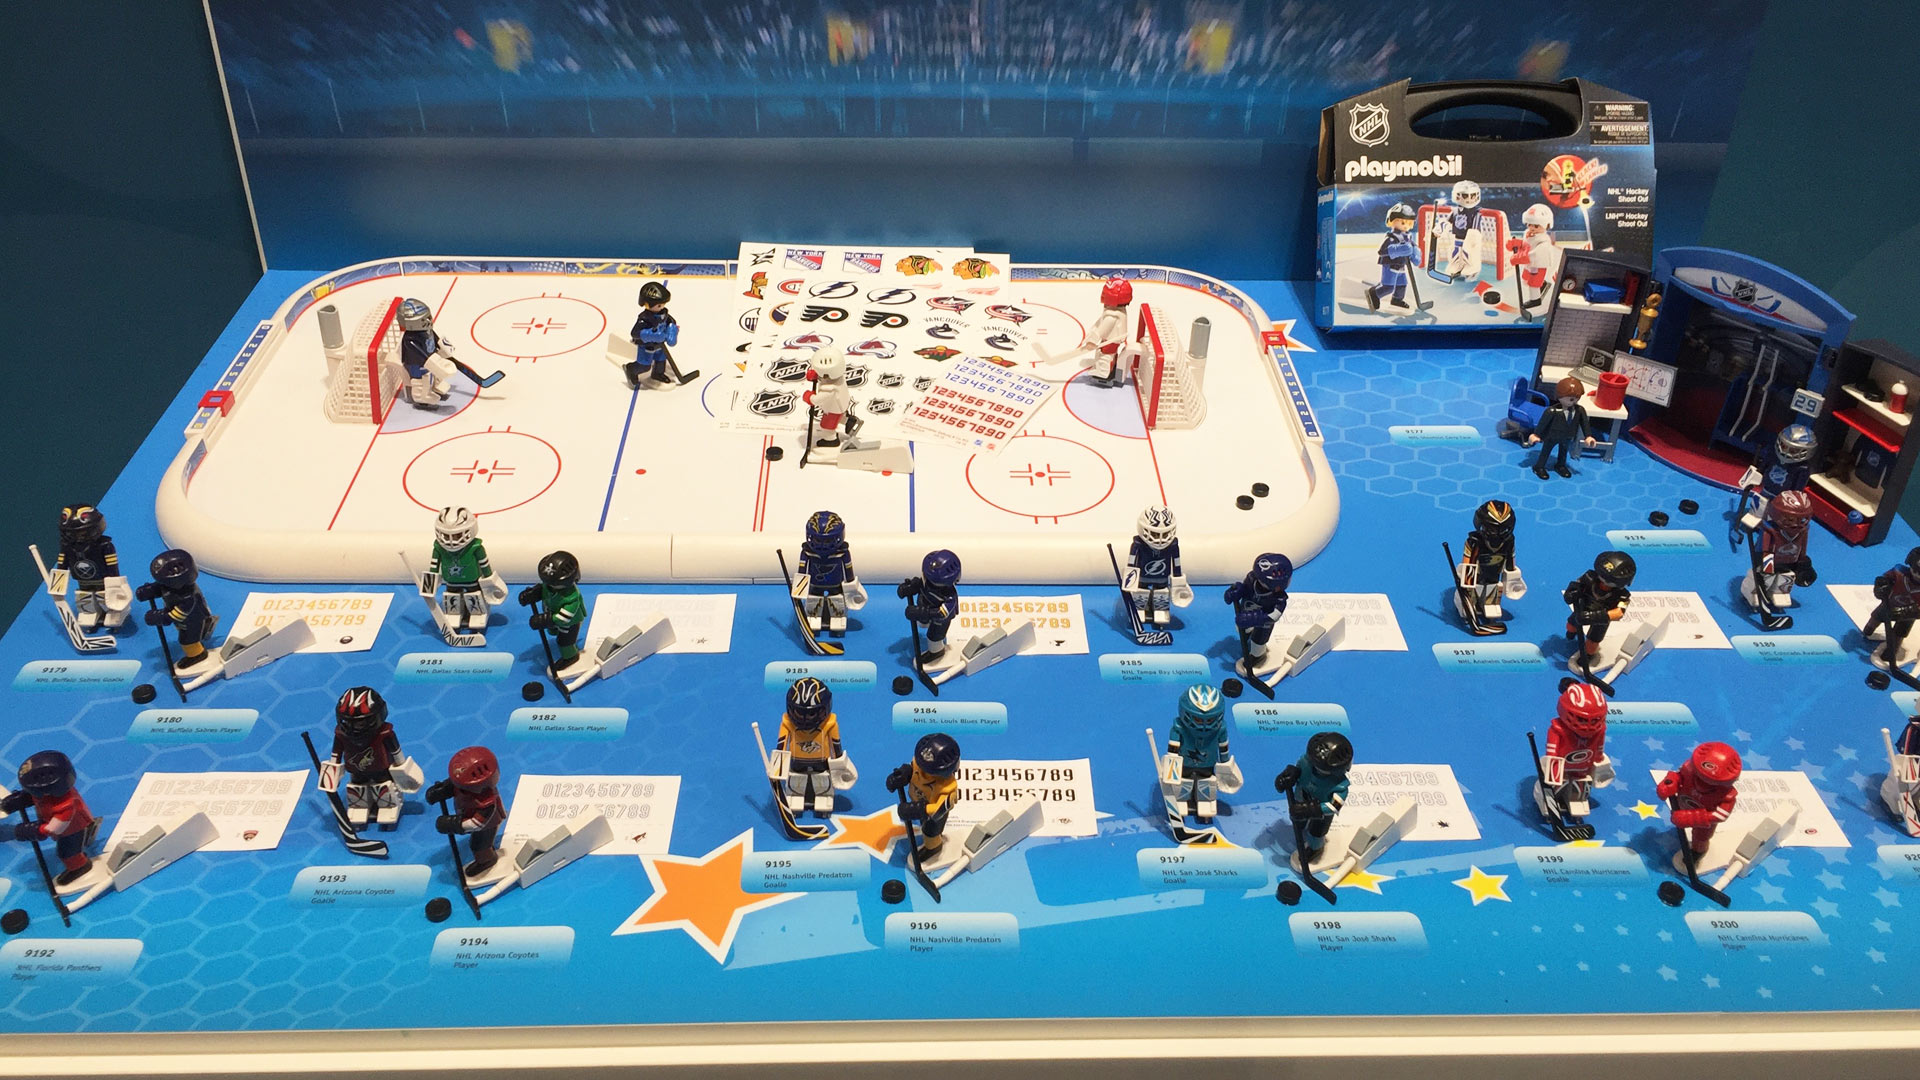 Playmobil Hockey NHL Set Skaters and Goalies at Toy Fair 2017